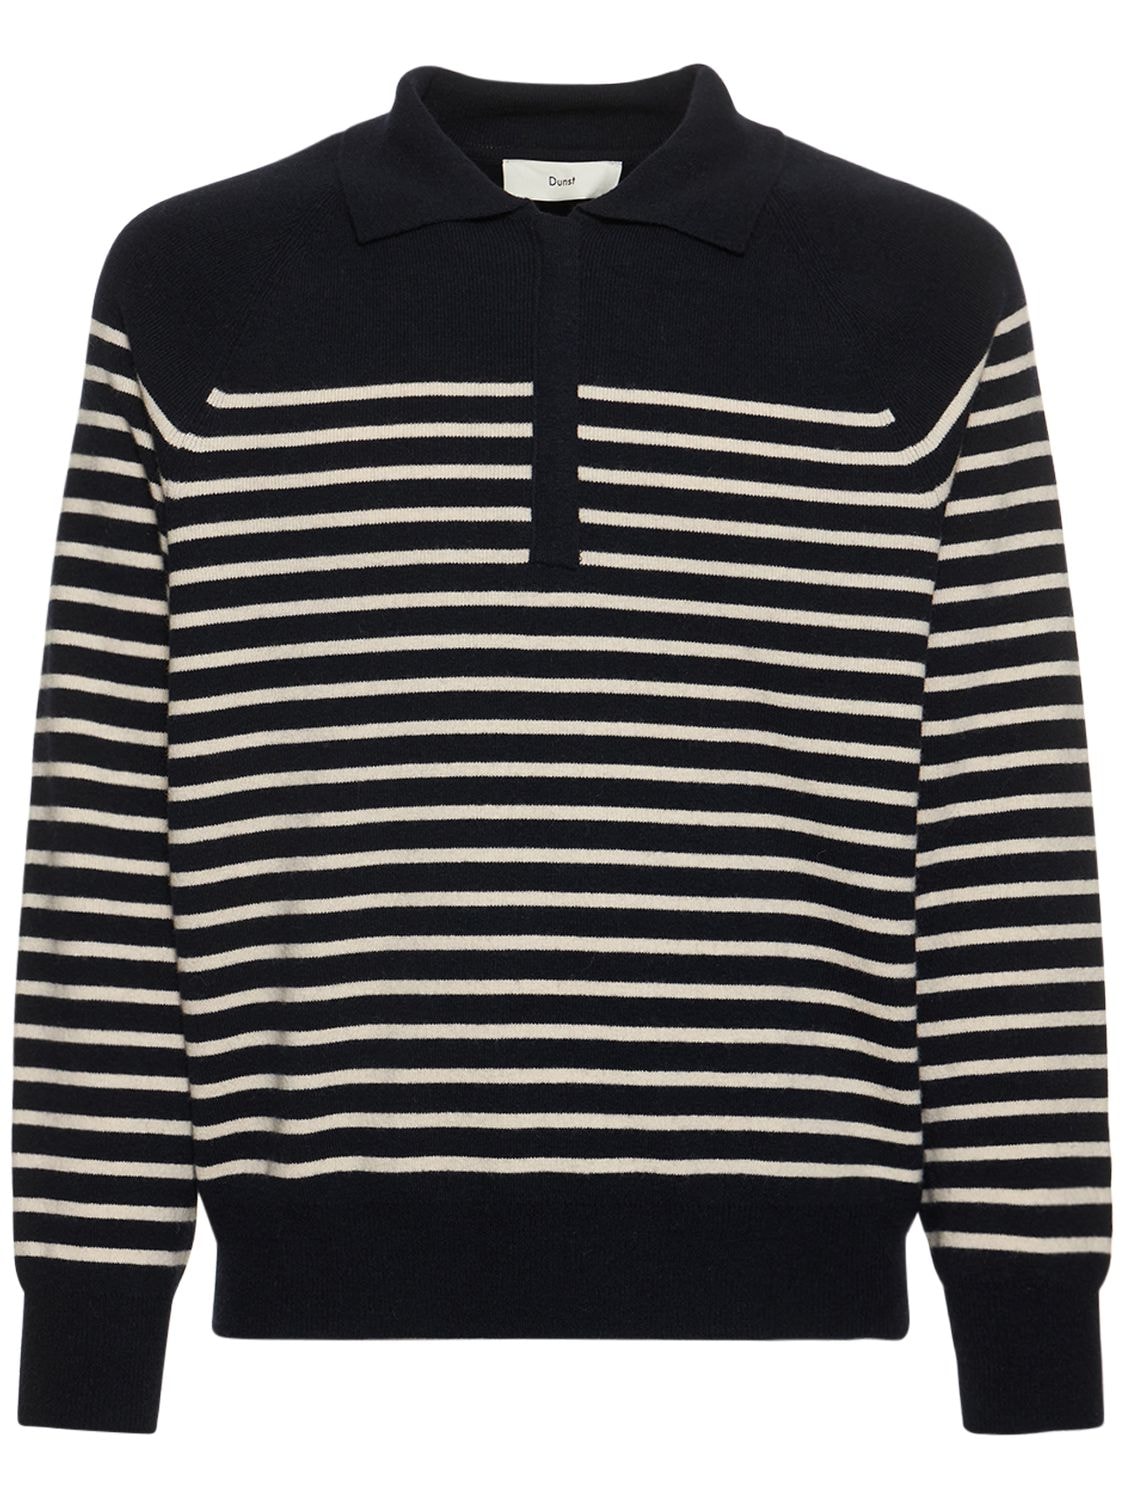 DUNST KNIT POLO NECK SWEATER